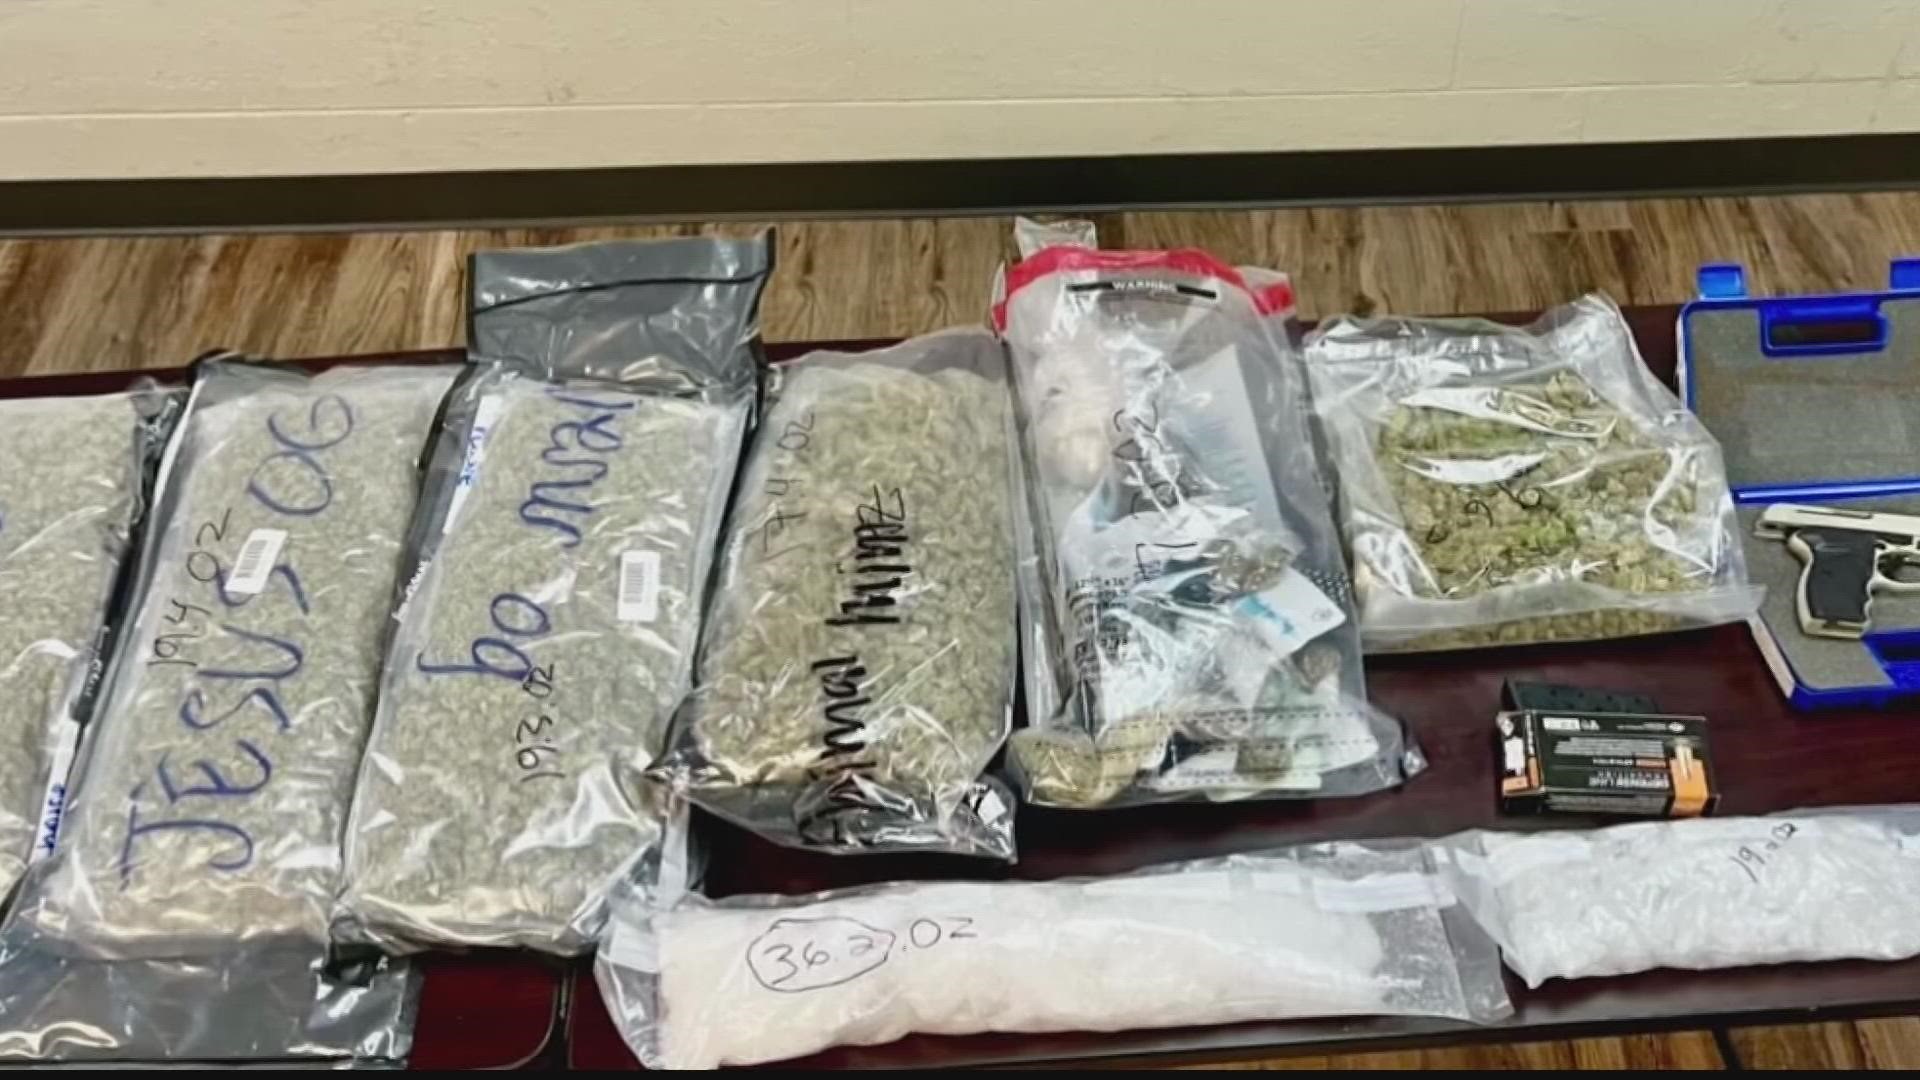 Police are commending their officers for making their biggest drug bust in over six years.